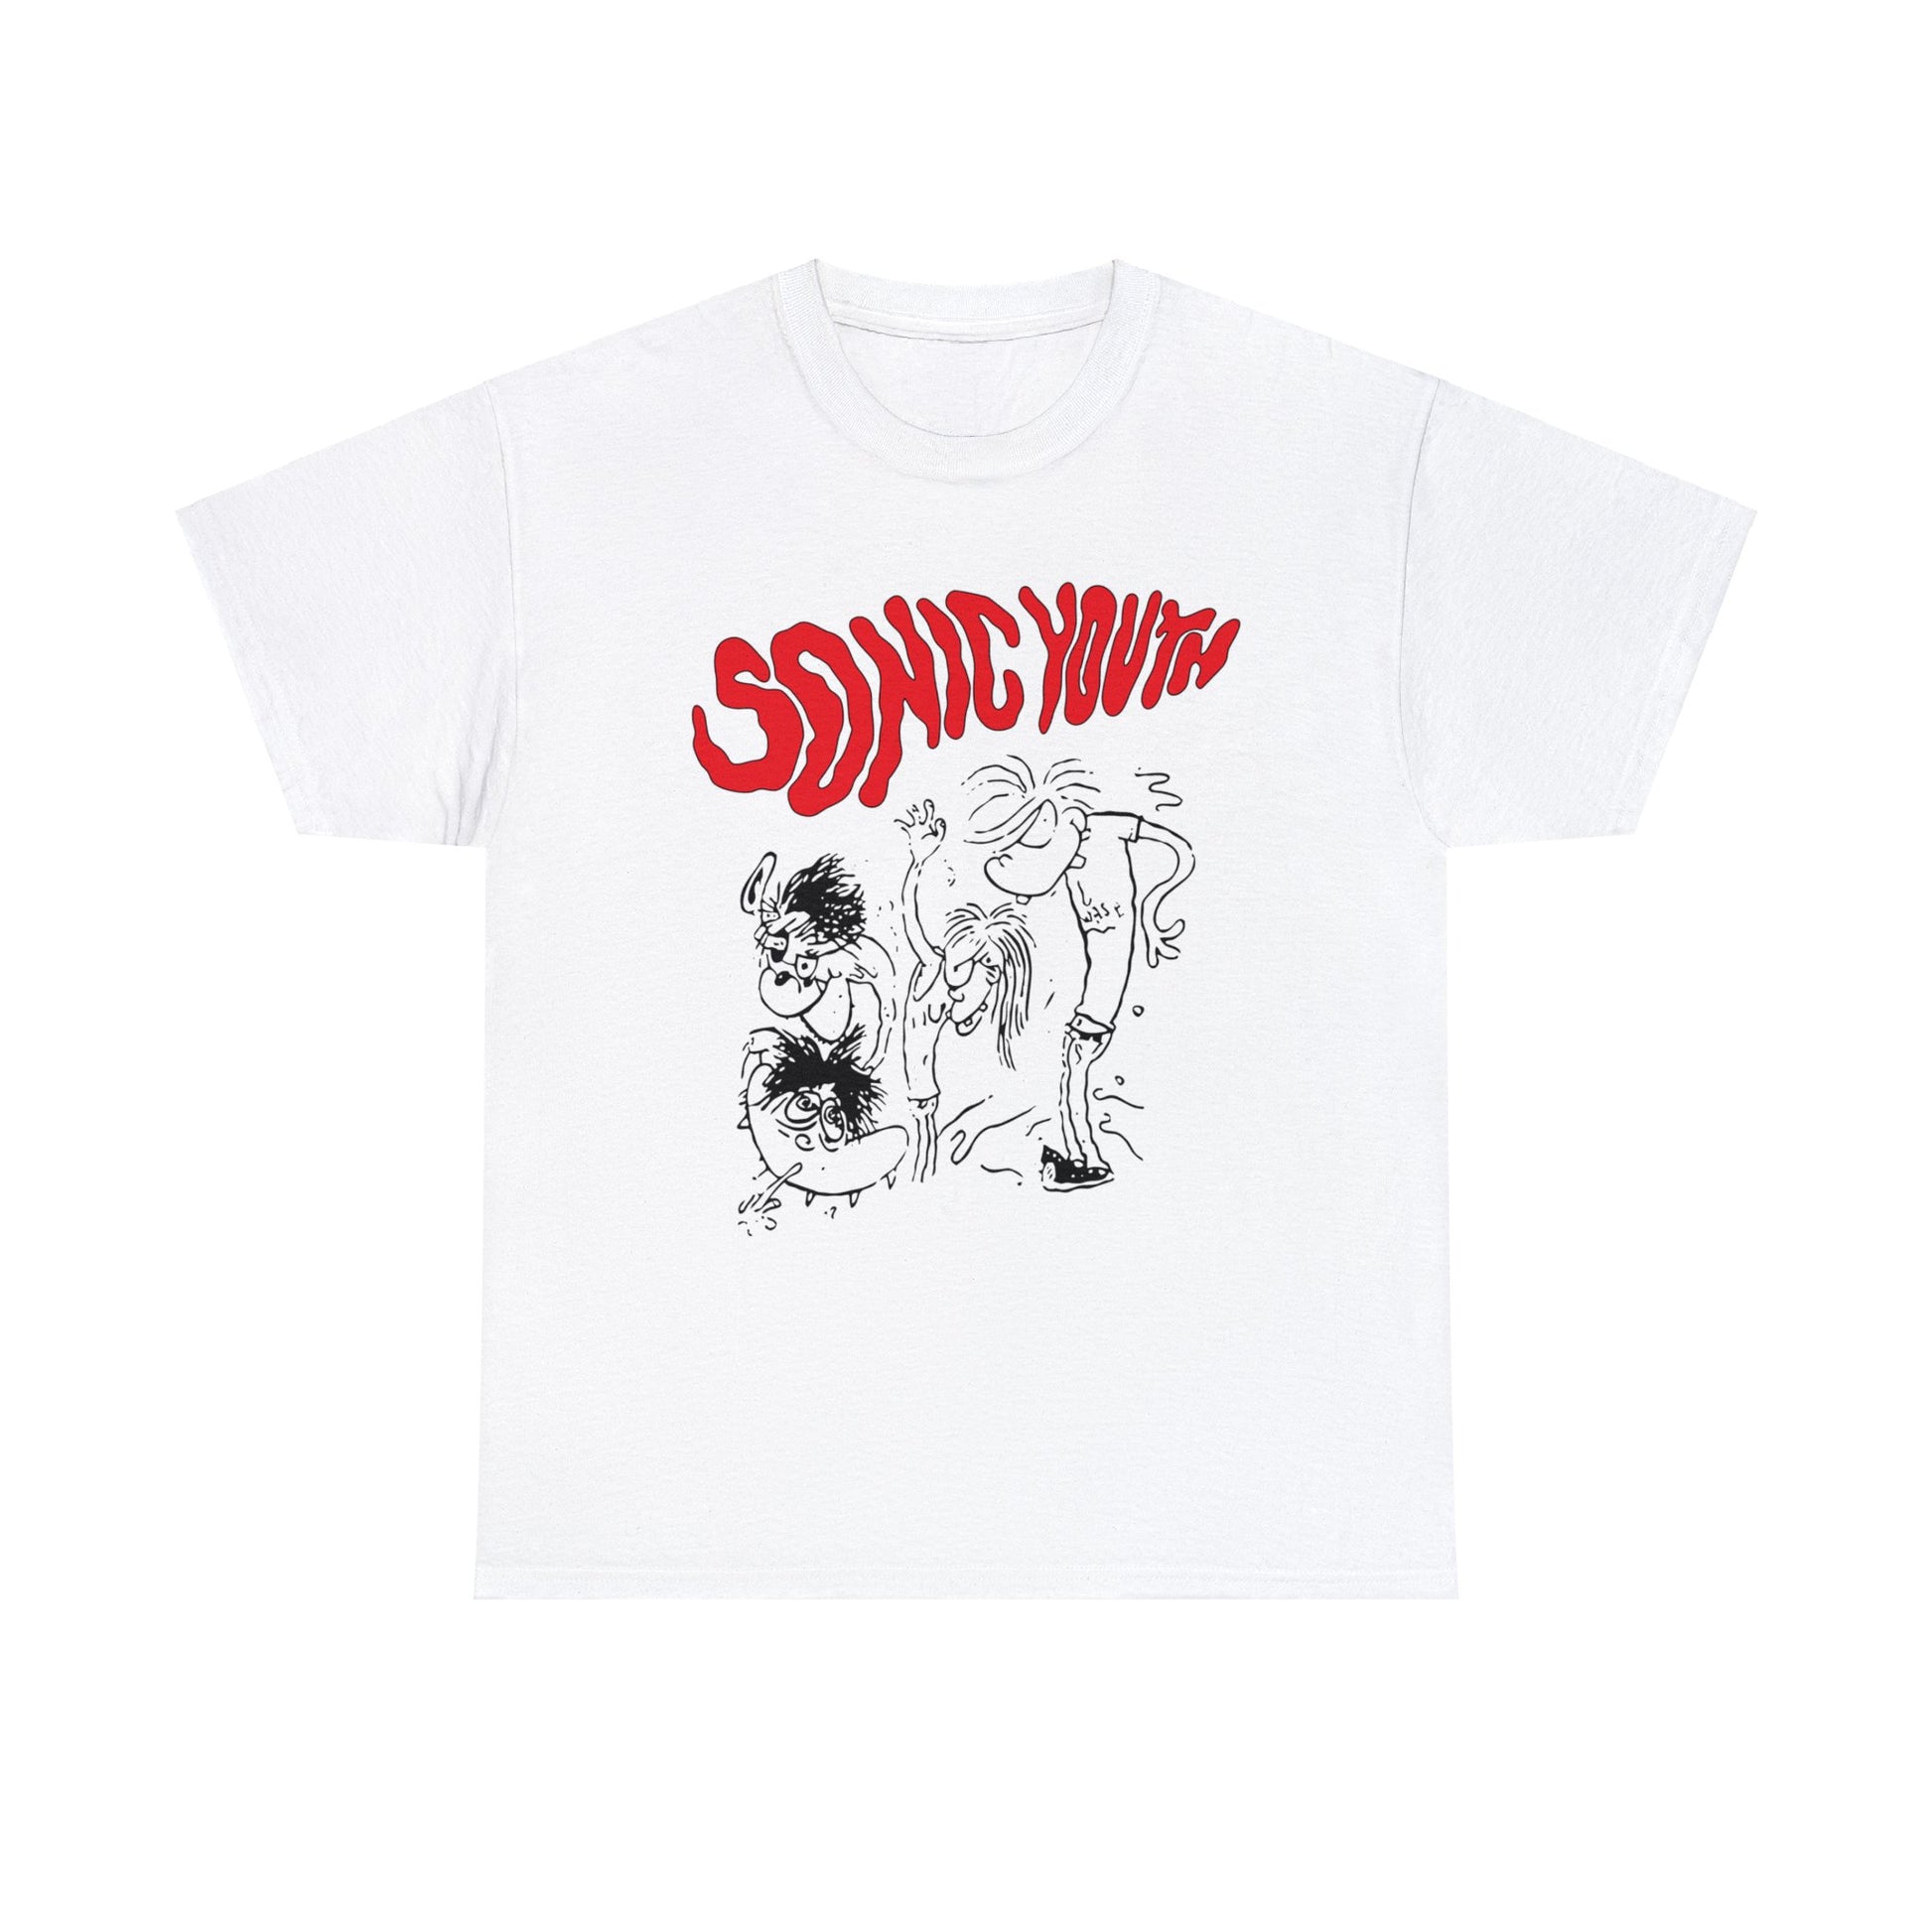 SONIC YOUTH The Amps Bikini Tour 1995 T-shirt for Sale